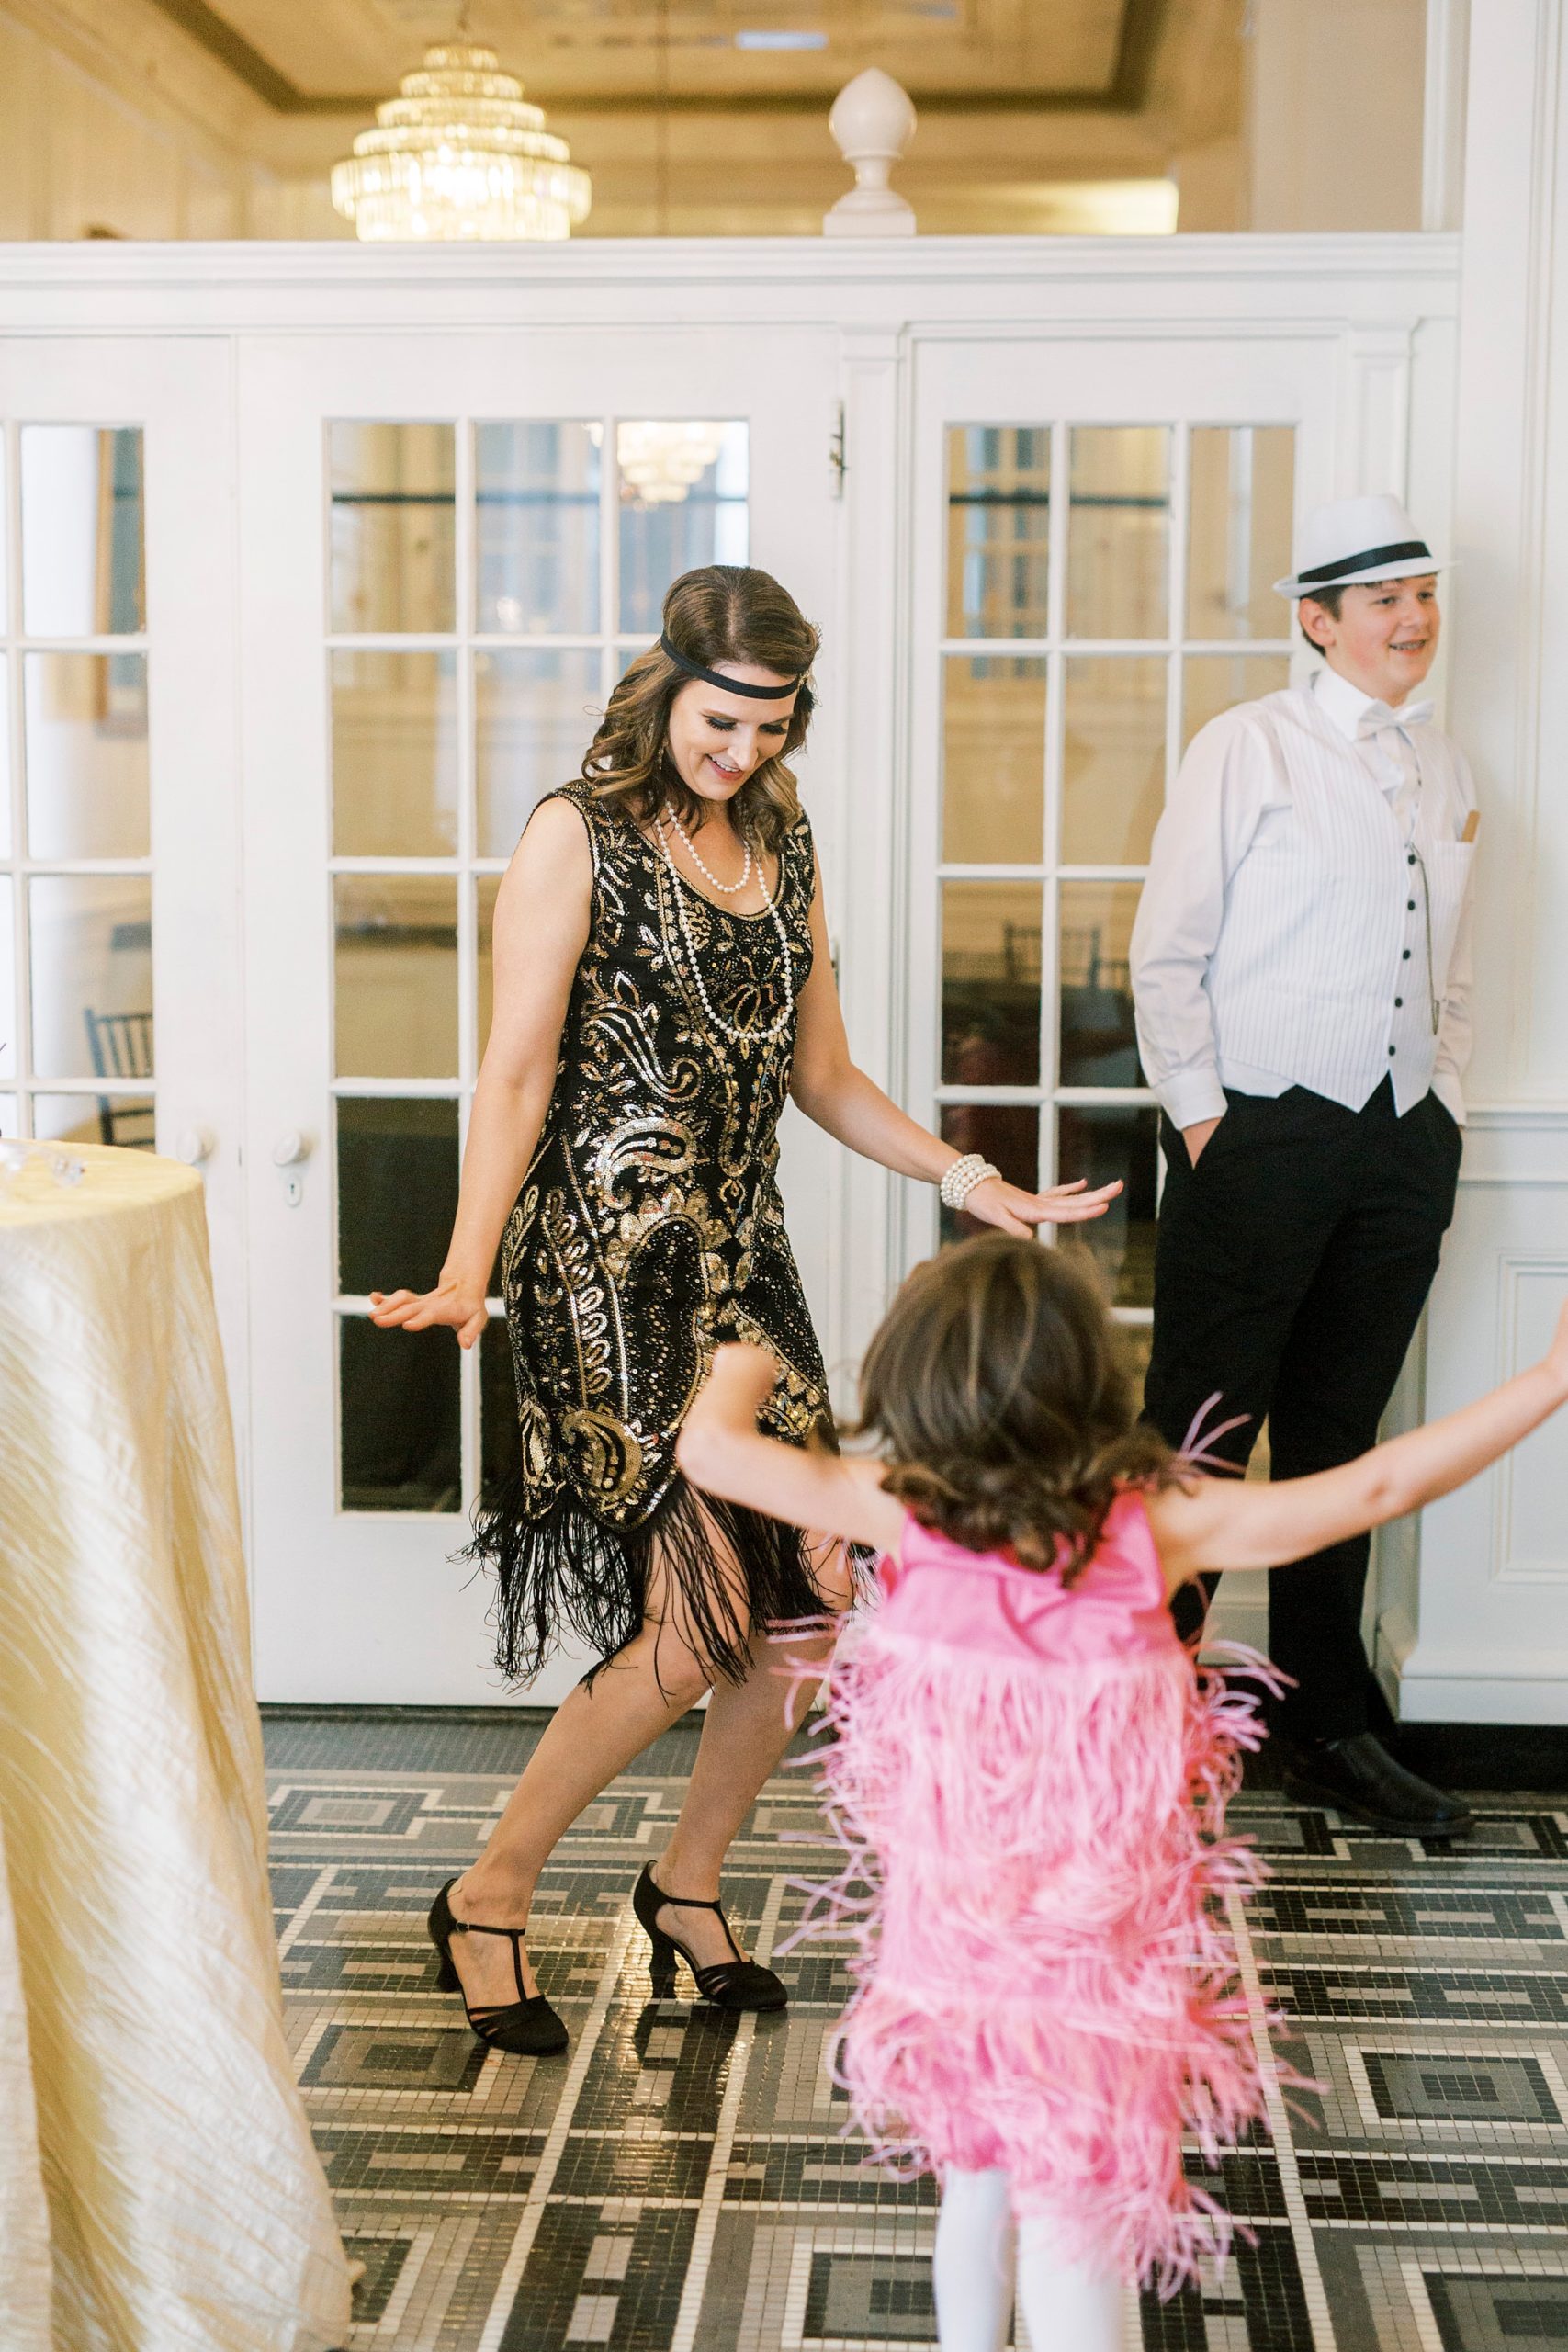 family dances during Hotel Concord birthday party